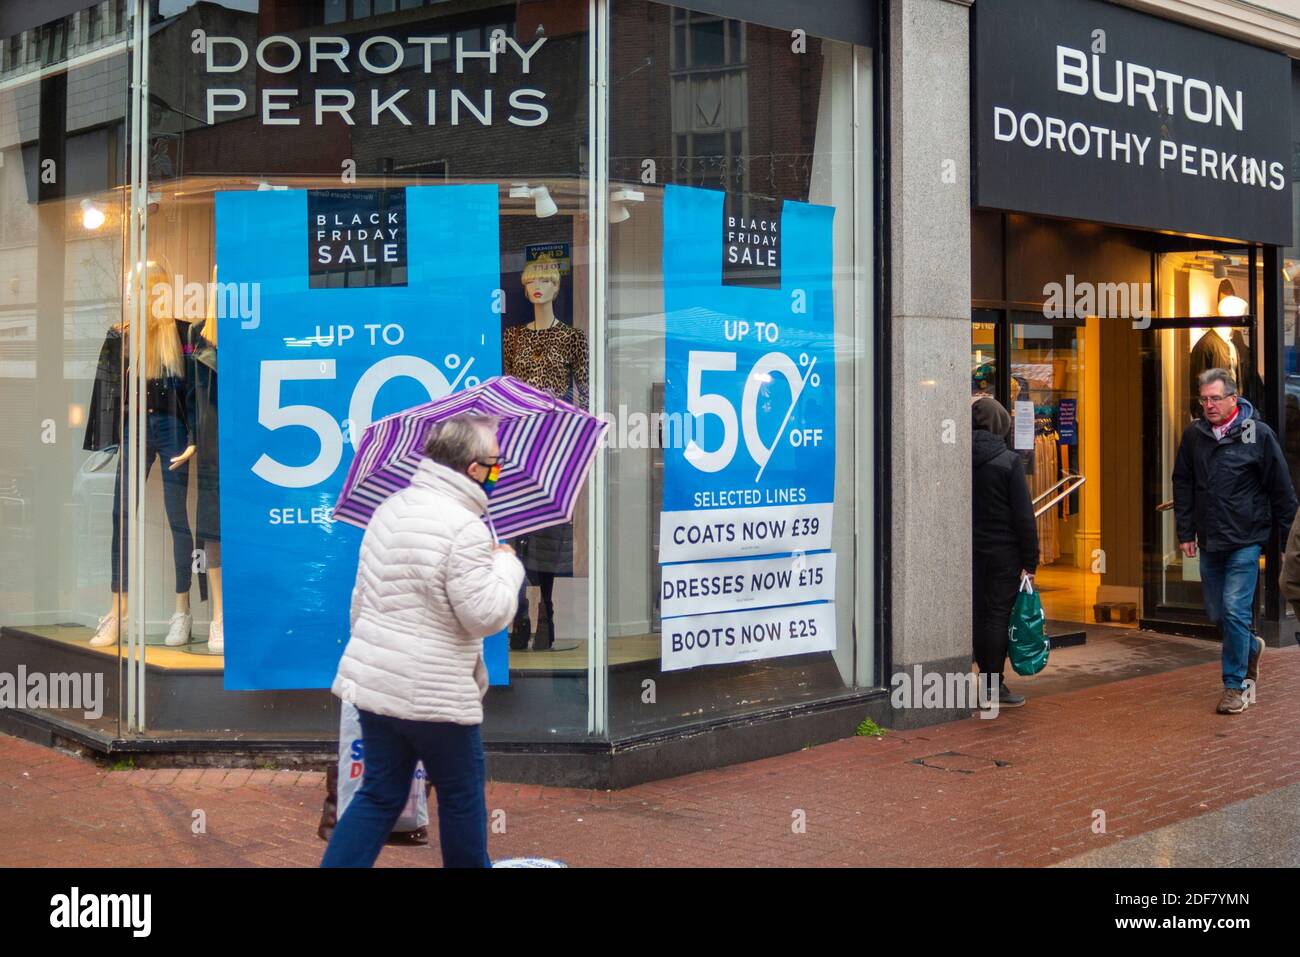 Arcadia Group, Burton, Dorothy Perkins fashion shop in High Street,  Southend on Sea, Essex, UK. Half price black Friday sale sign in window.  Person Stock Photo - Alamy